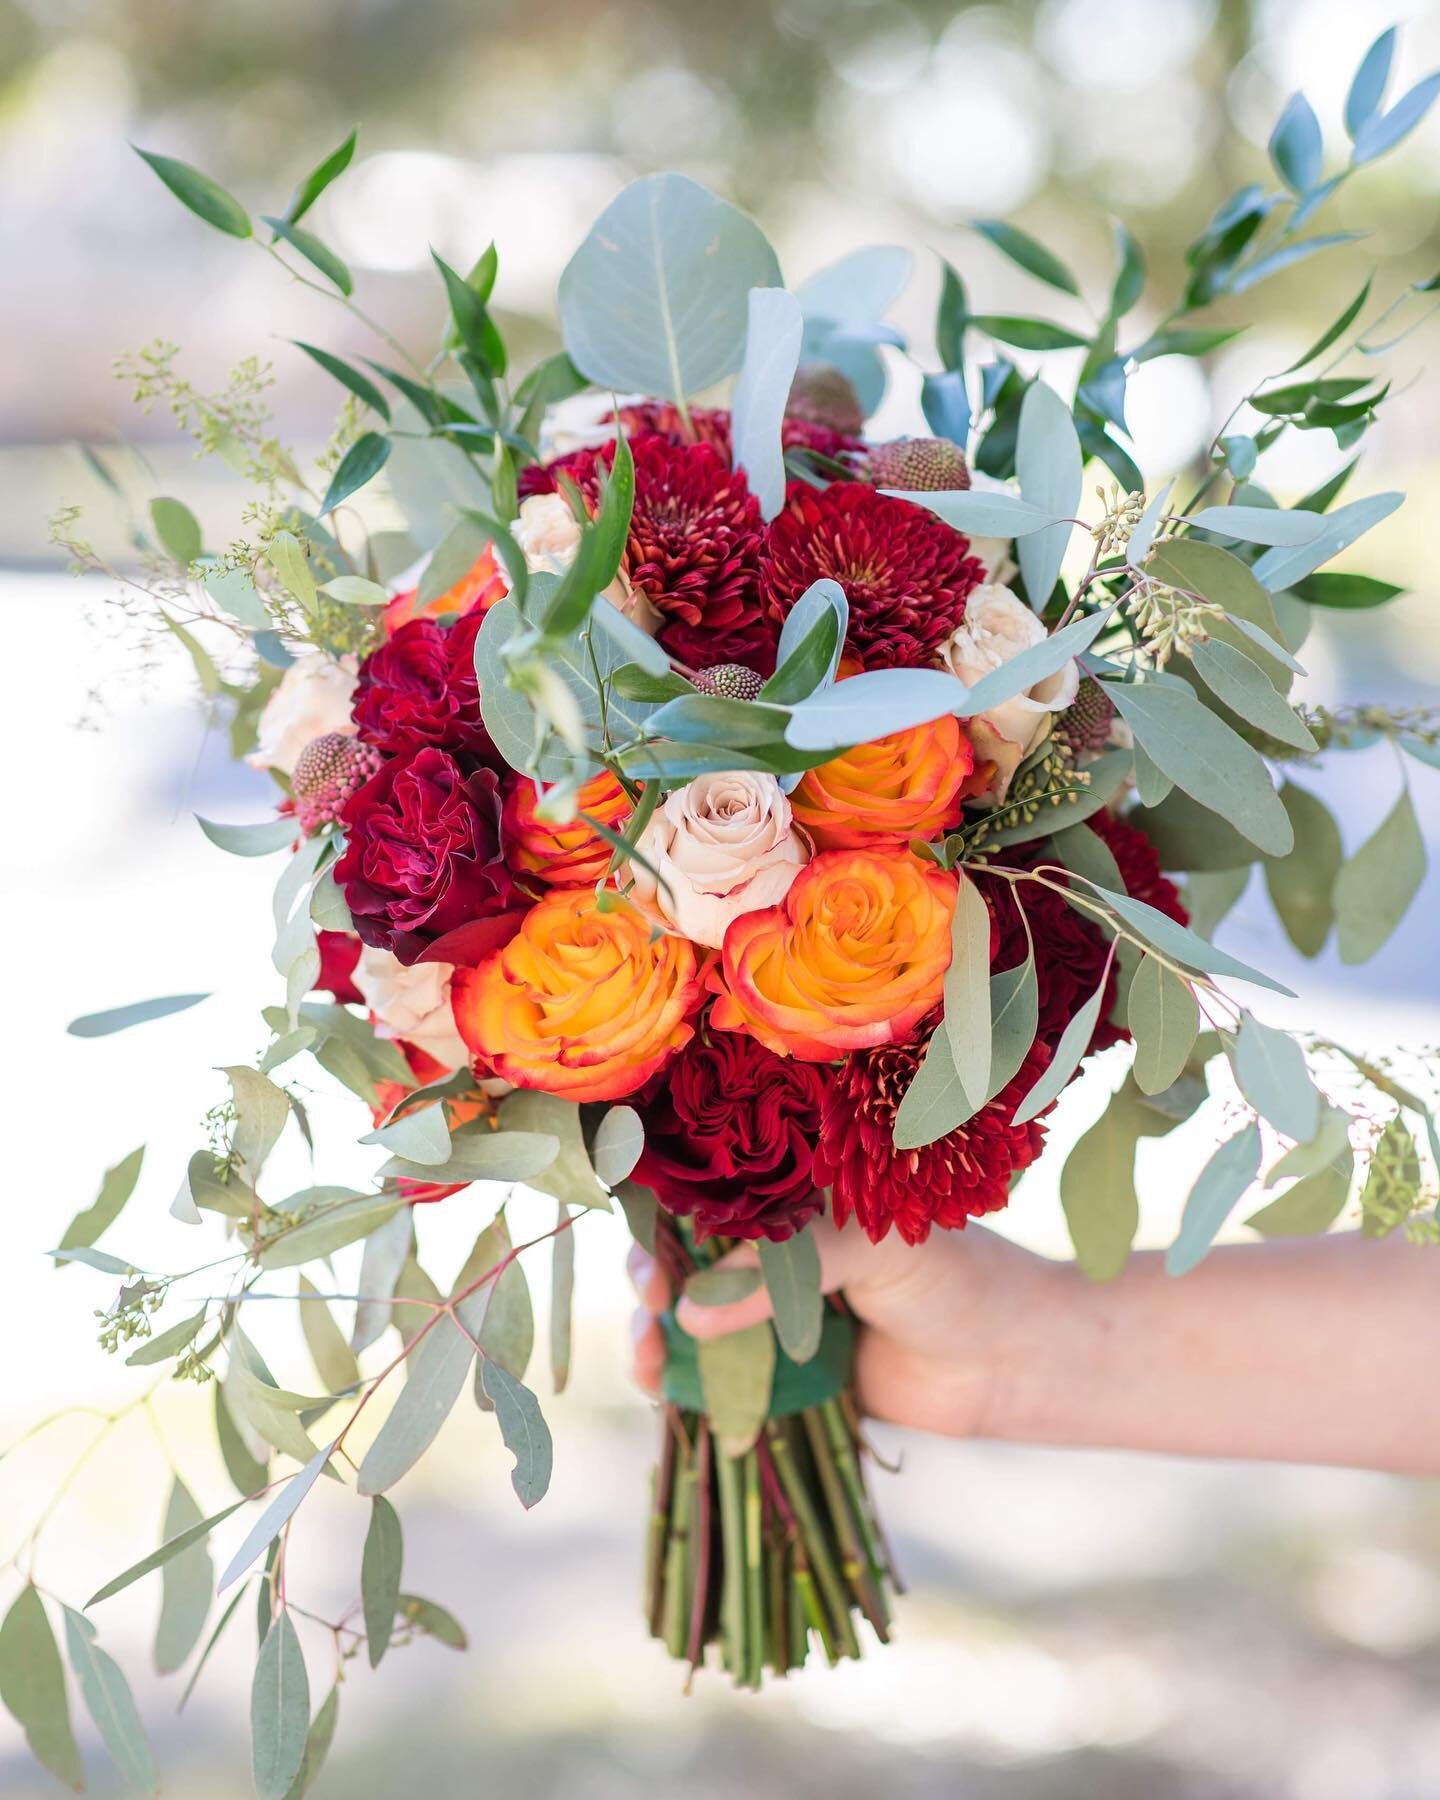 Fall pallet In the spring? Yes please #Orlandoflorist